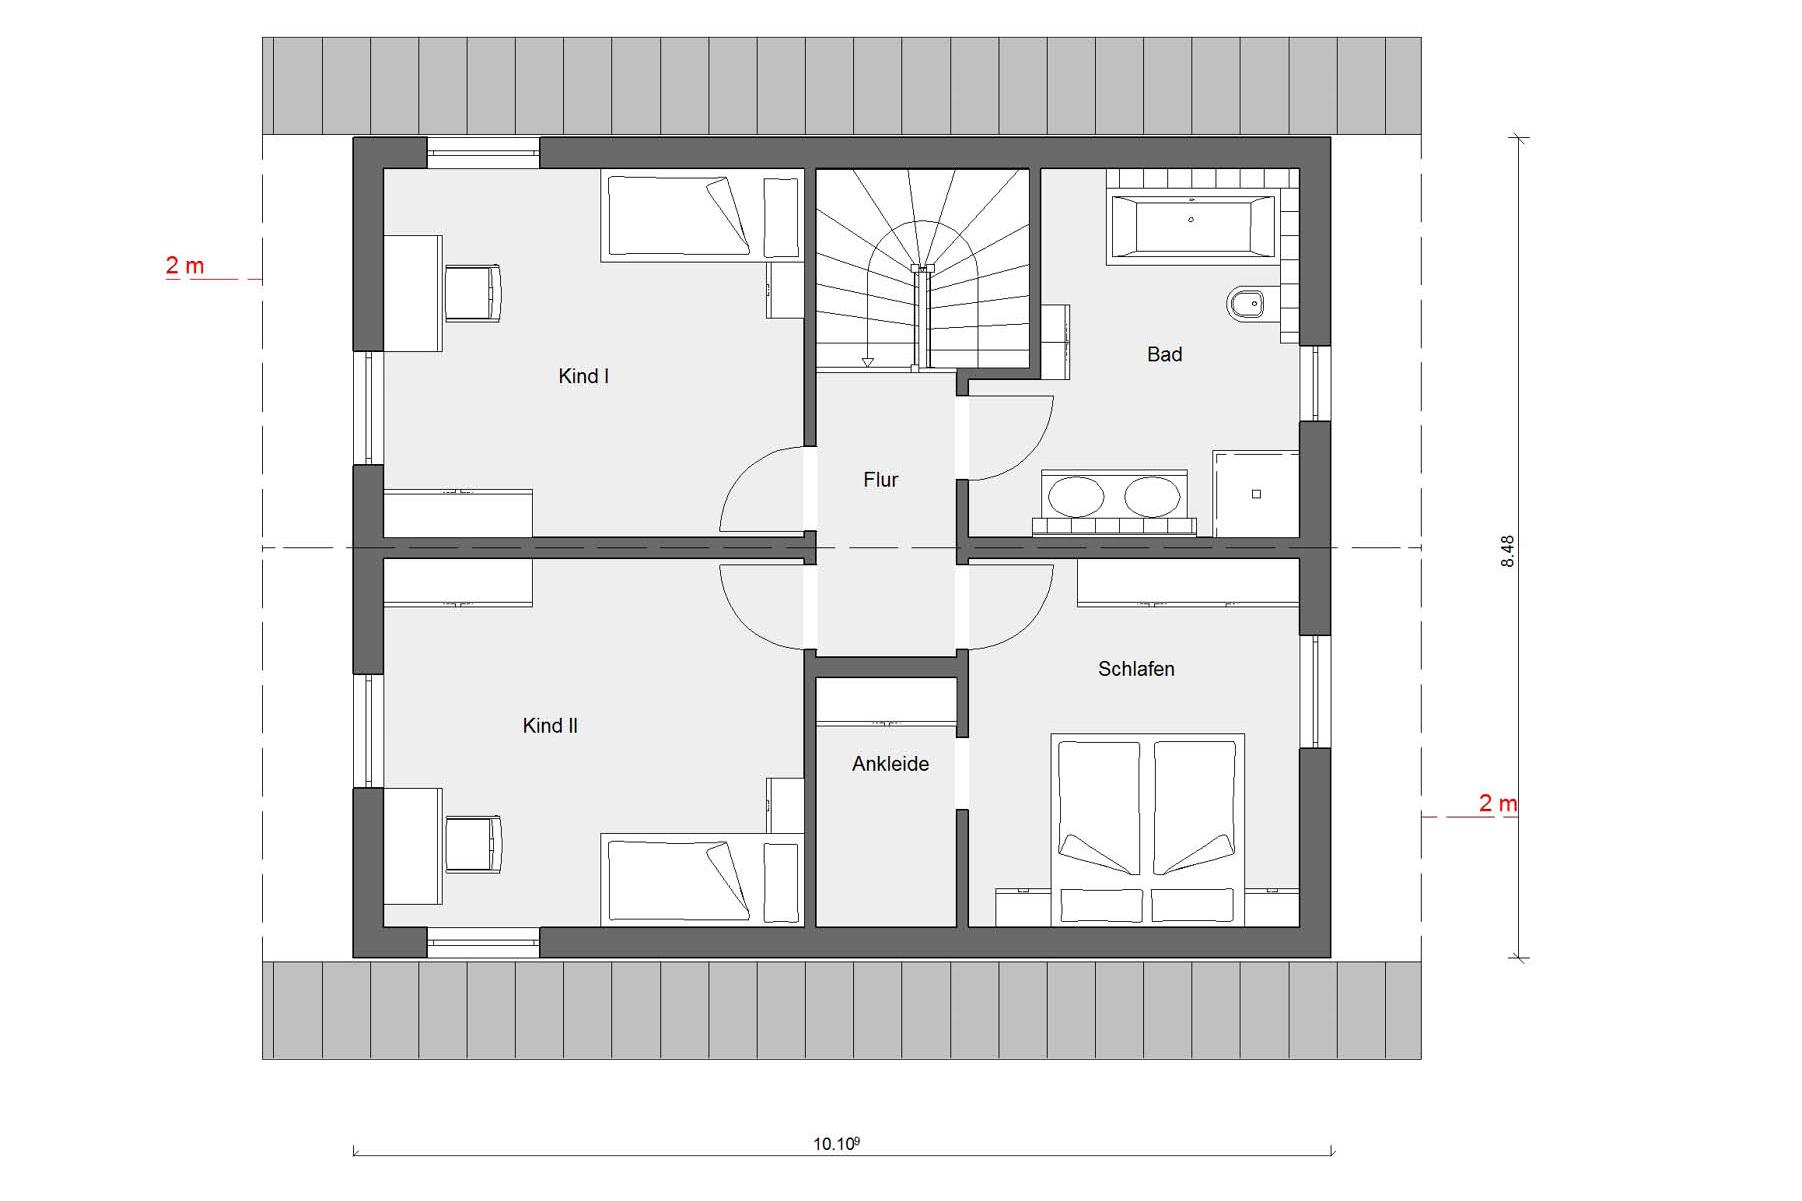 Attic floor plan E 15-140.4 House with office